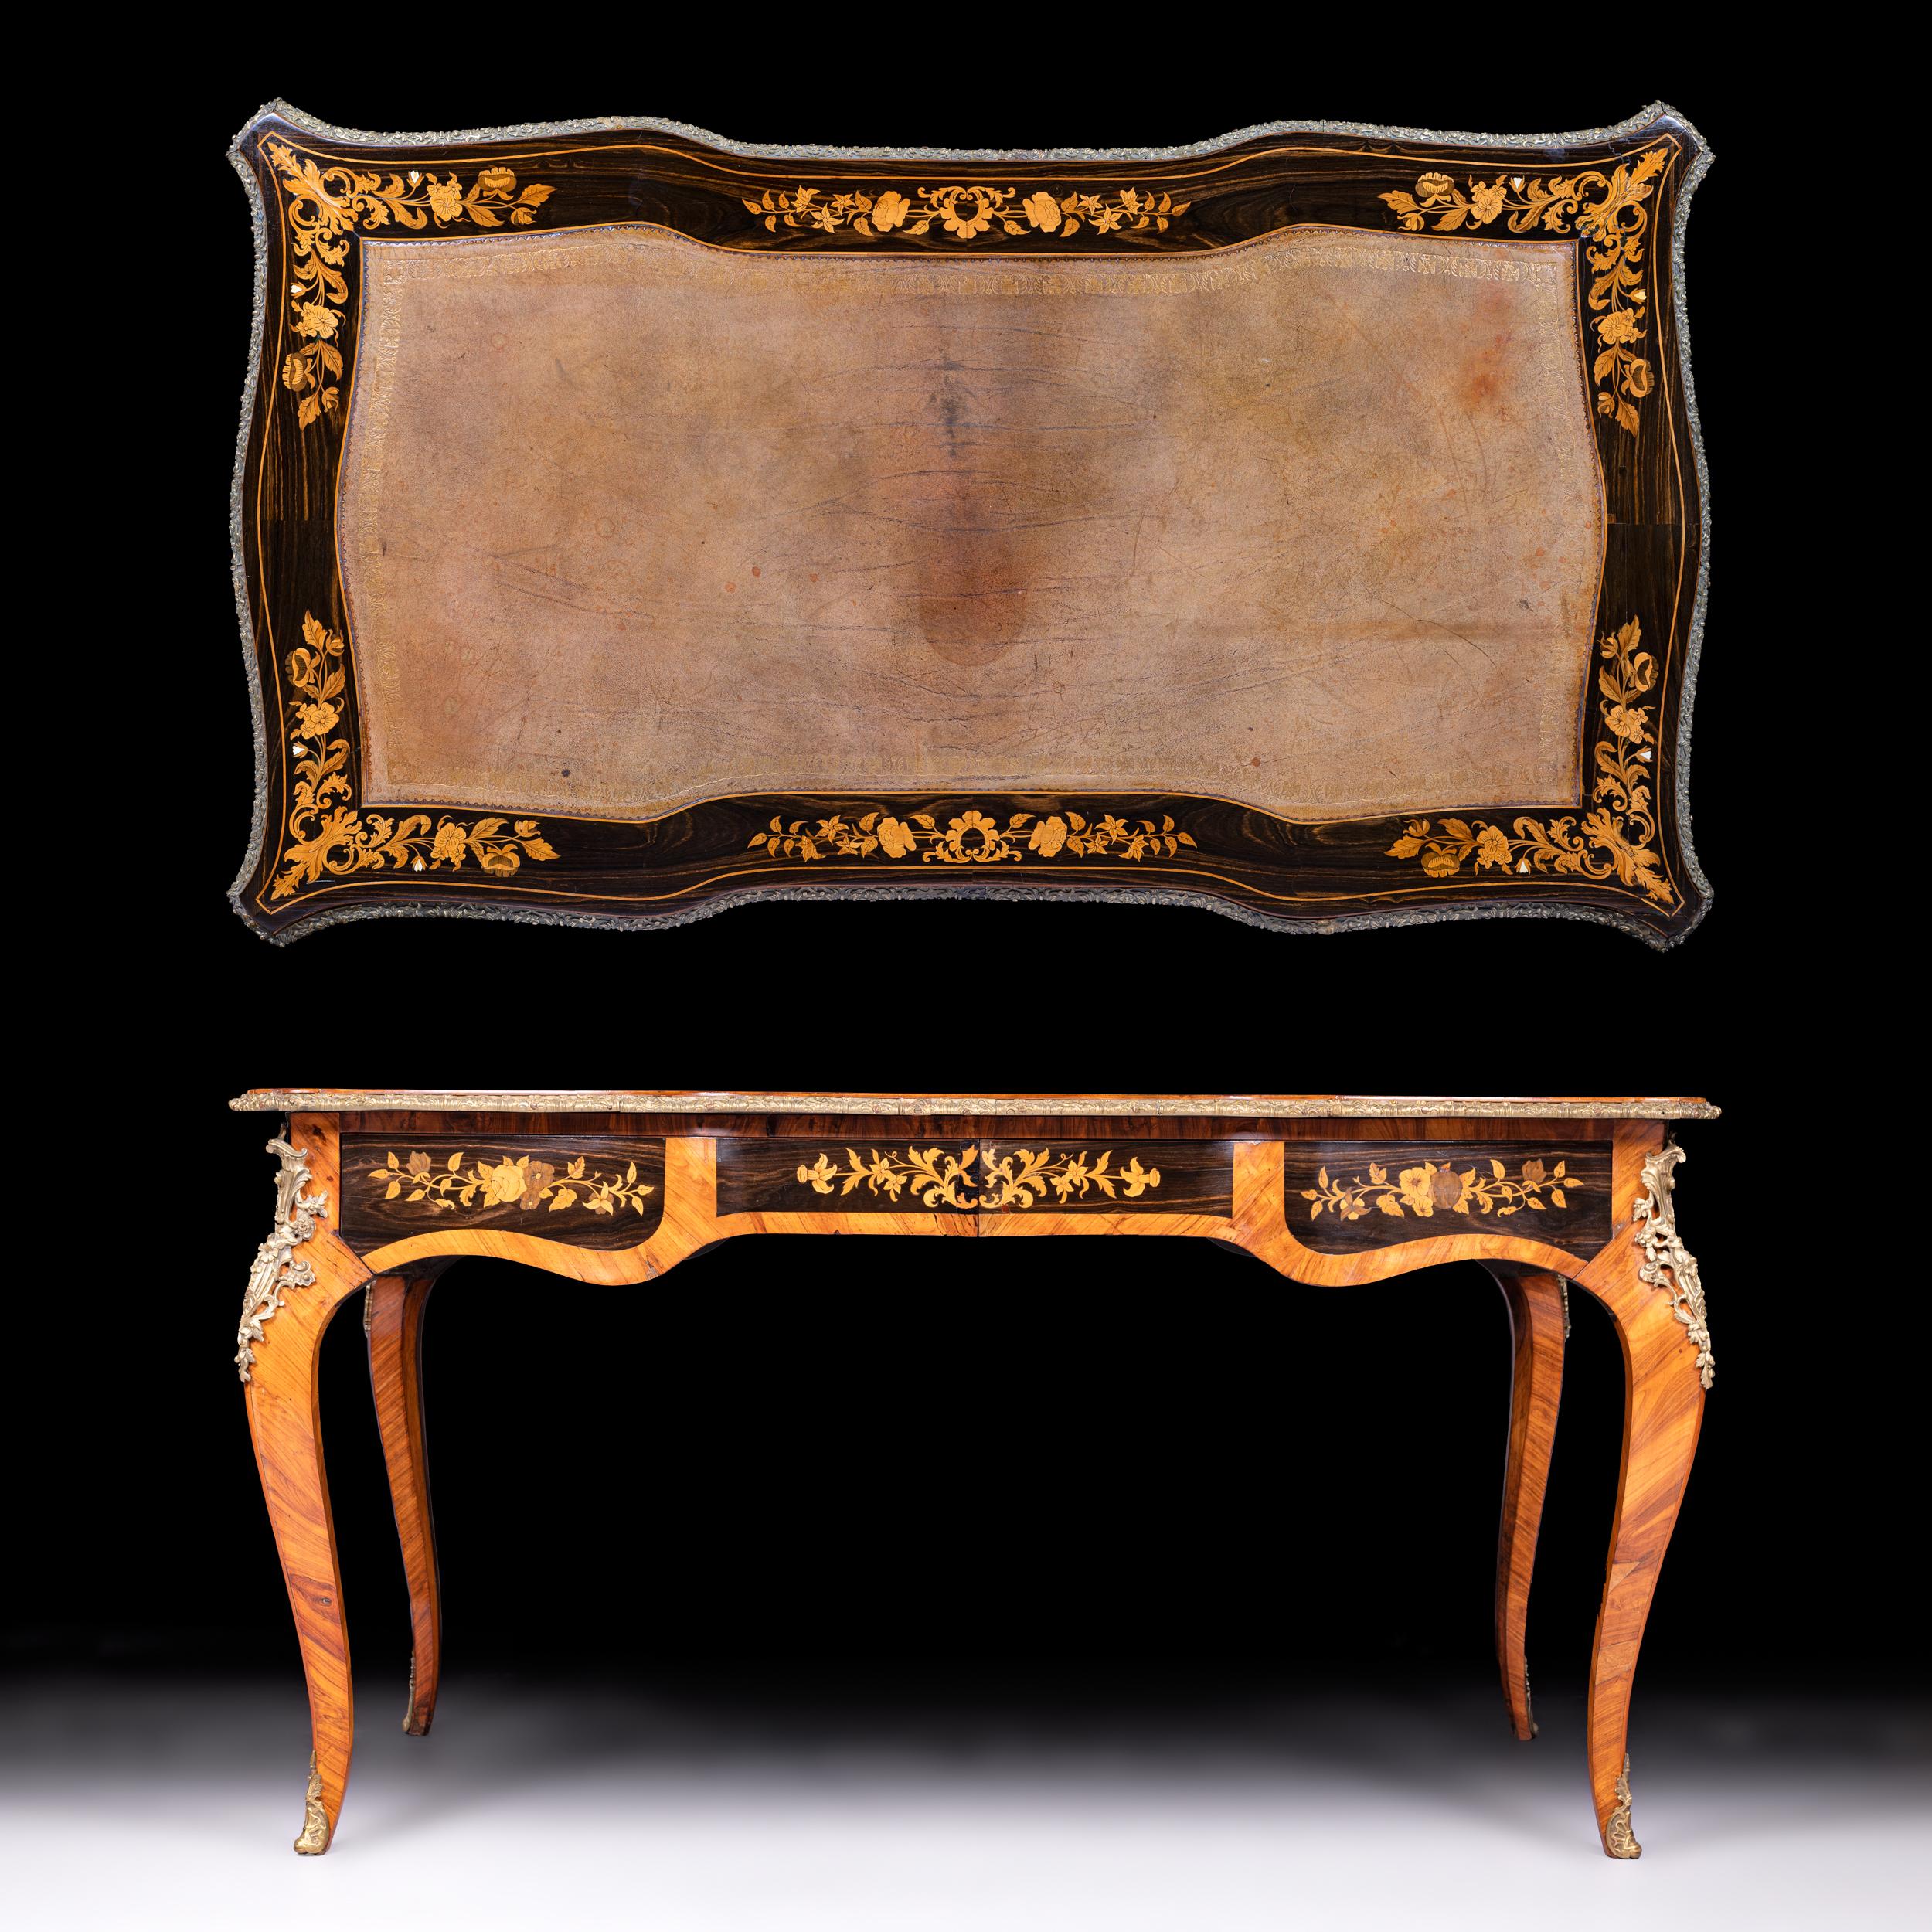 A fine 19th century Louis XV style Walnut, Ebony and floral marquetry Bureau Plat in the manner of Edward Holmes Baldock, the serpentine shaped top inset with a panel of tooled leather within a border of scroll work and floral trails, the corners